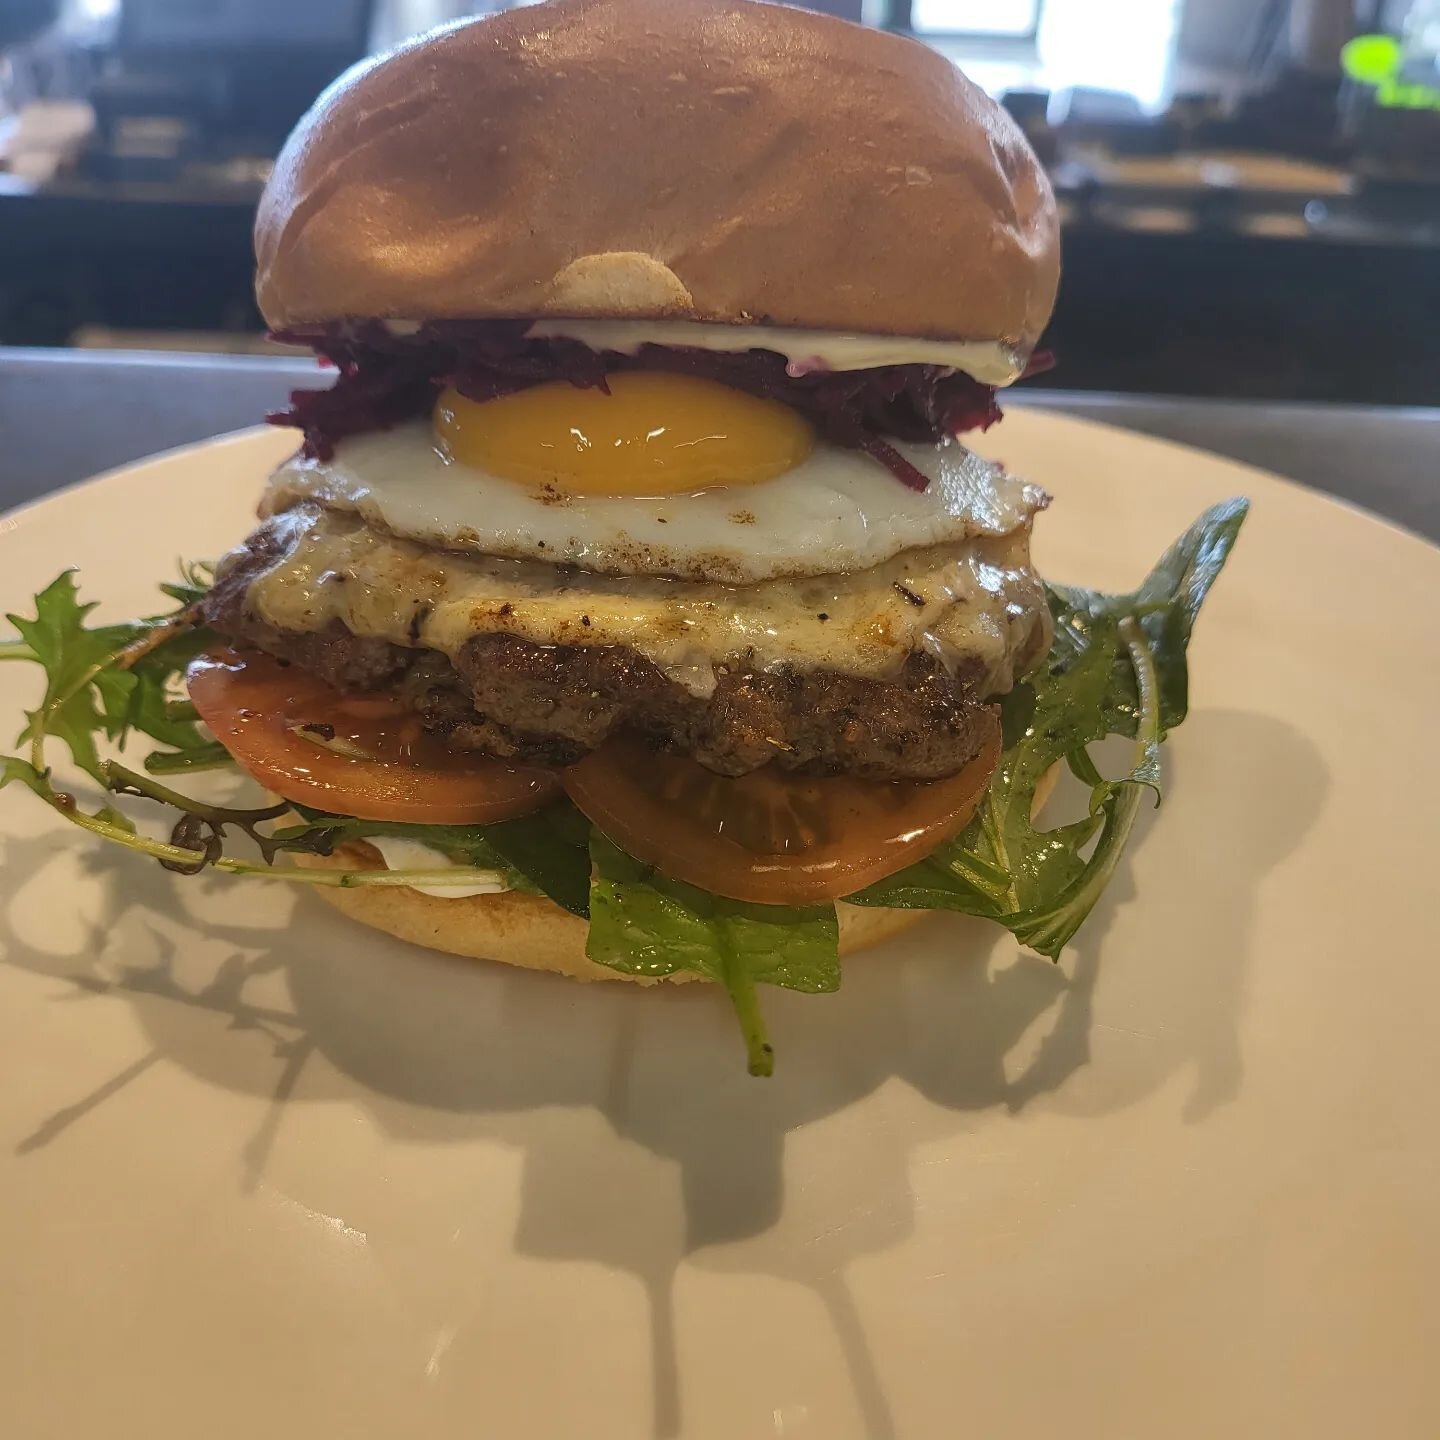 The Kiwi style burger showcasing on our burger night this Friday 😍

We have 2 tables of 2 left for the 7pm slot 

Lots of tables avalible at the 5.30 slot still. 

If you haven't already booked what better way to finish off this week than a burger, 